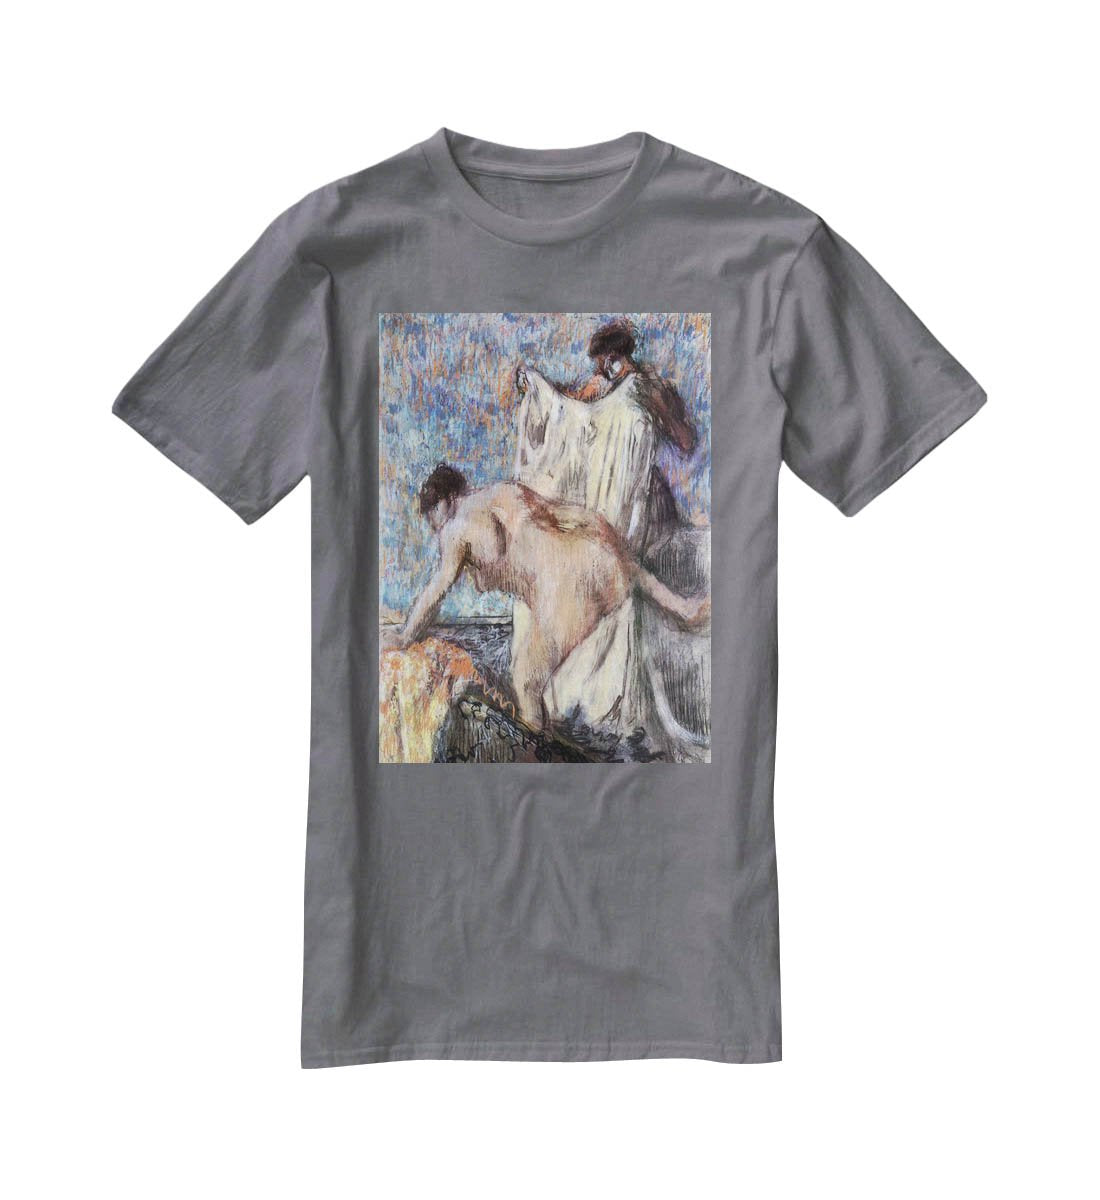 After bathing 3 by Degas T-Shirt - Canvas Art Rocks - 3